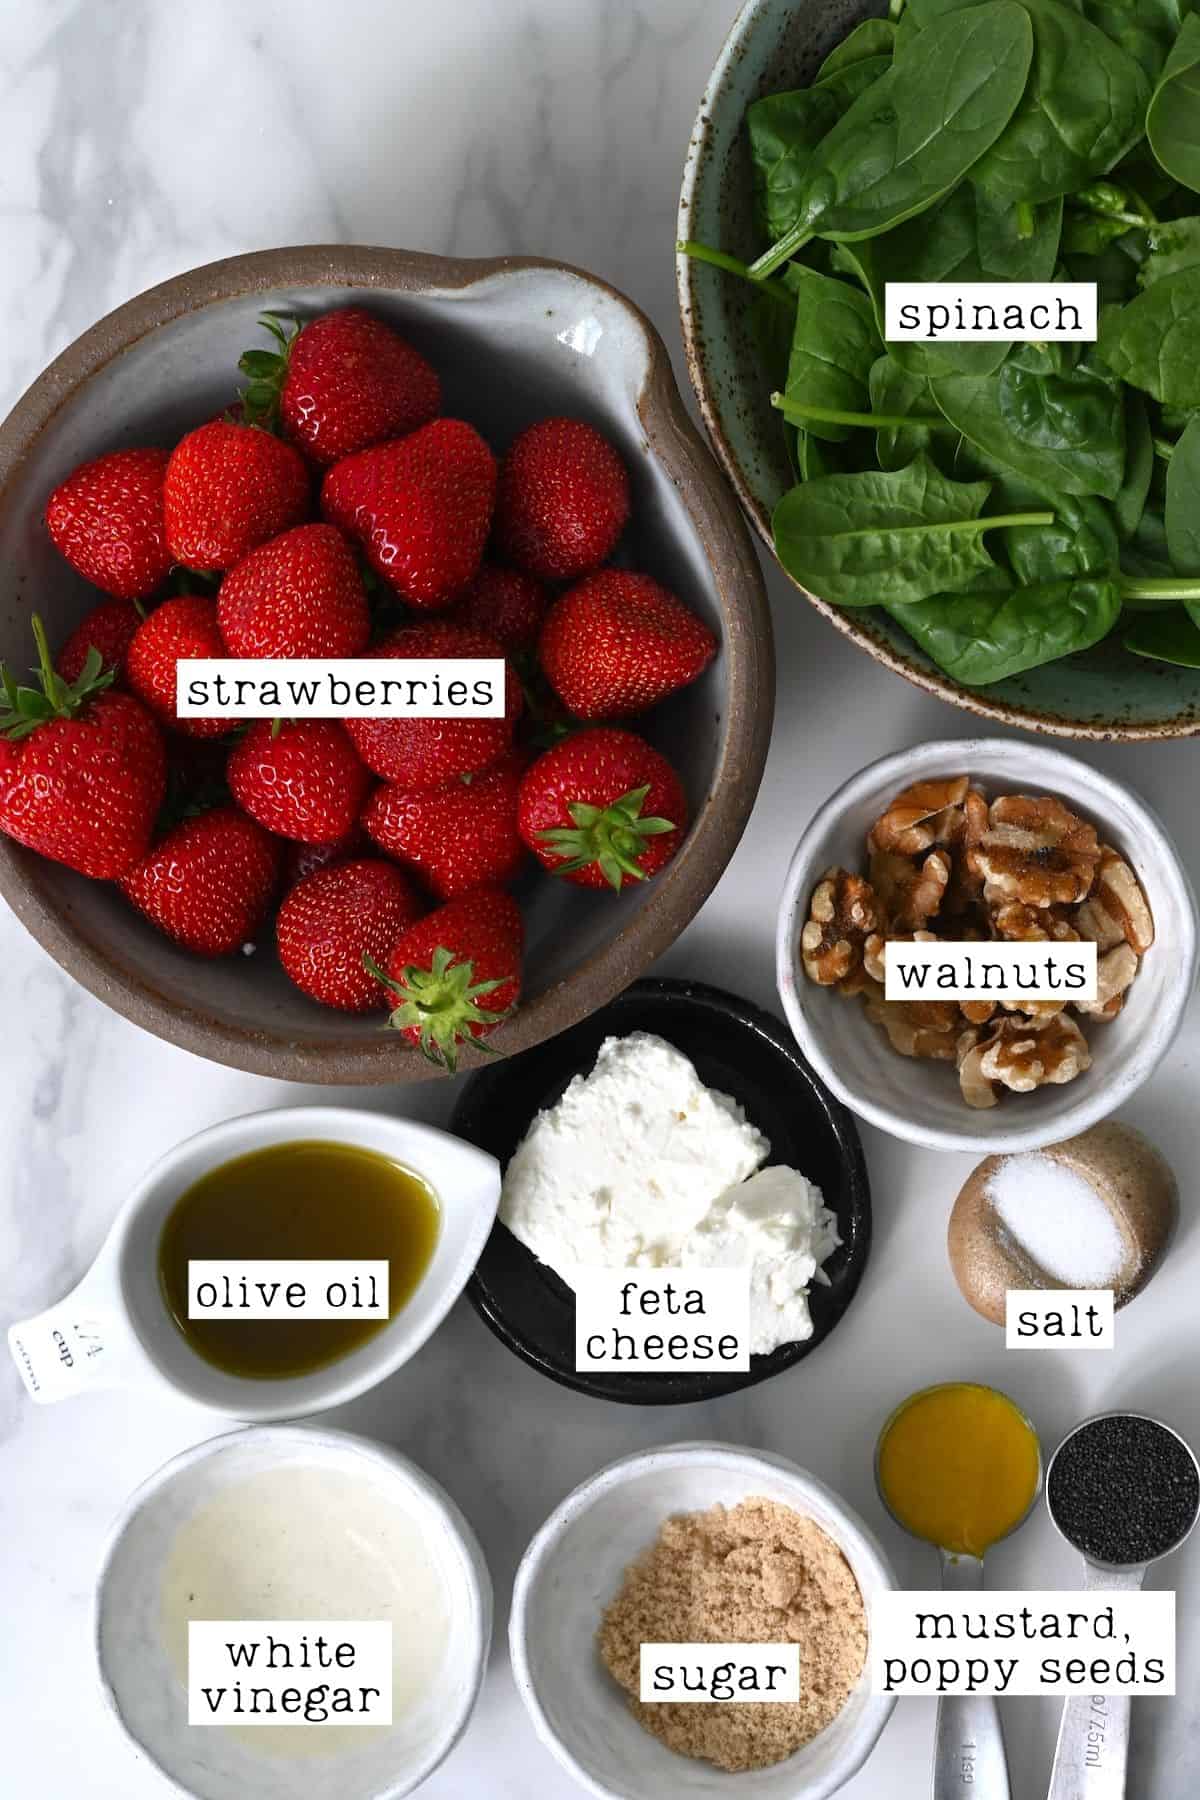 Ingredients for strawberry spinach salad